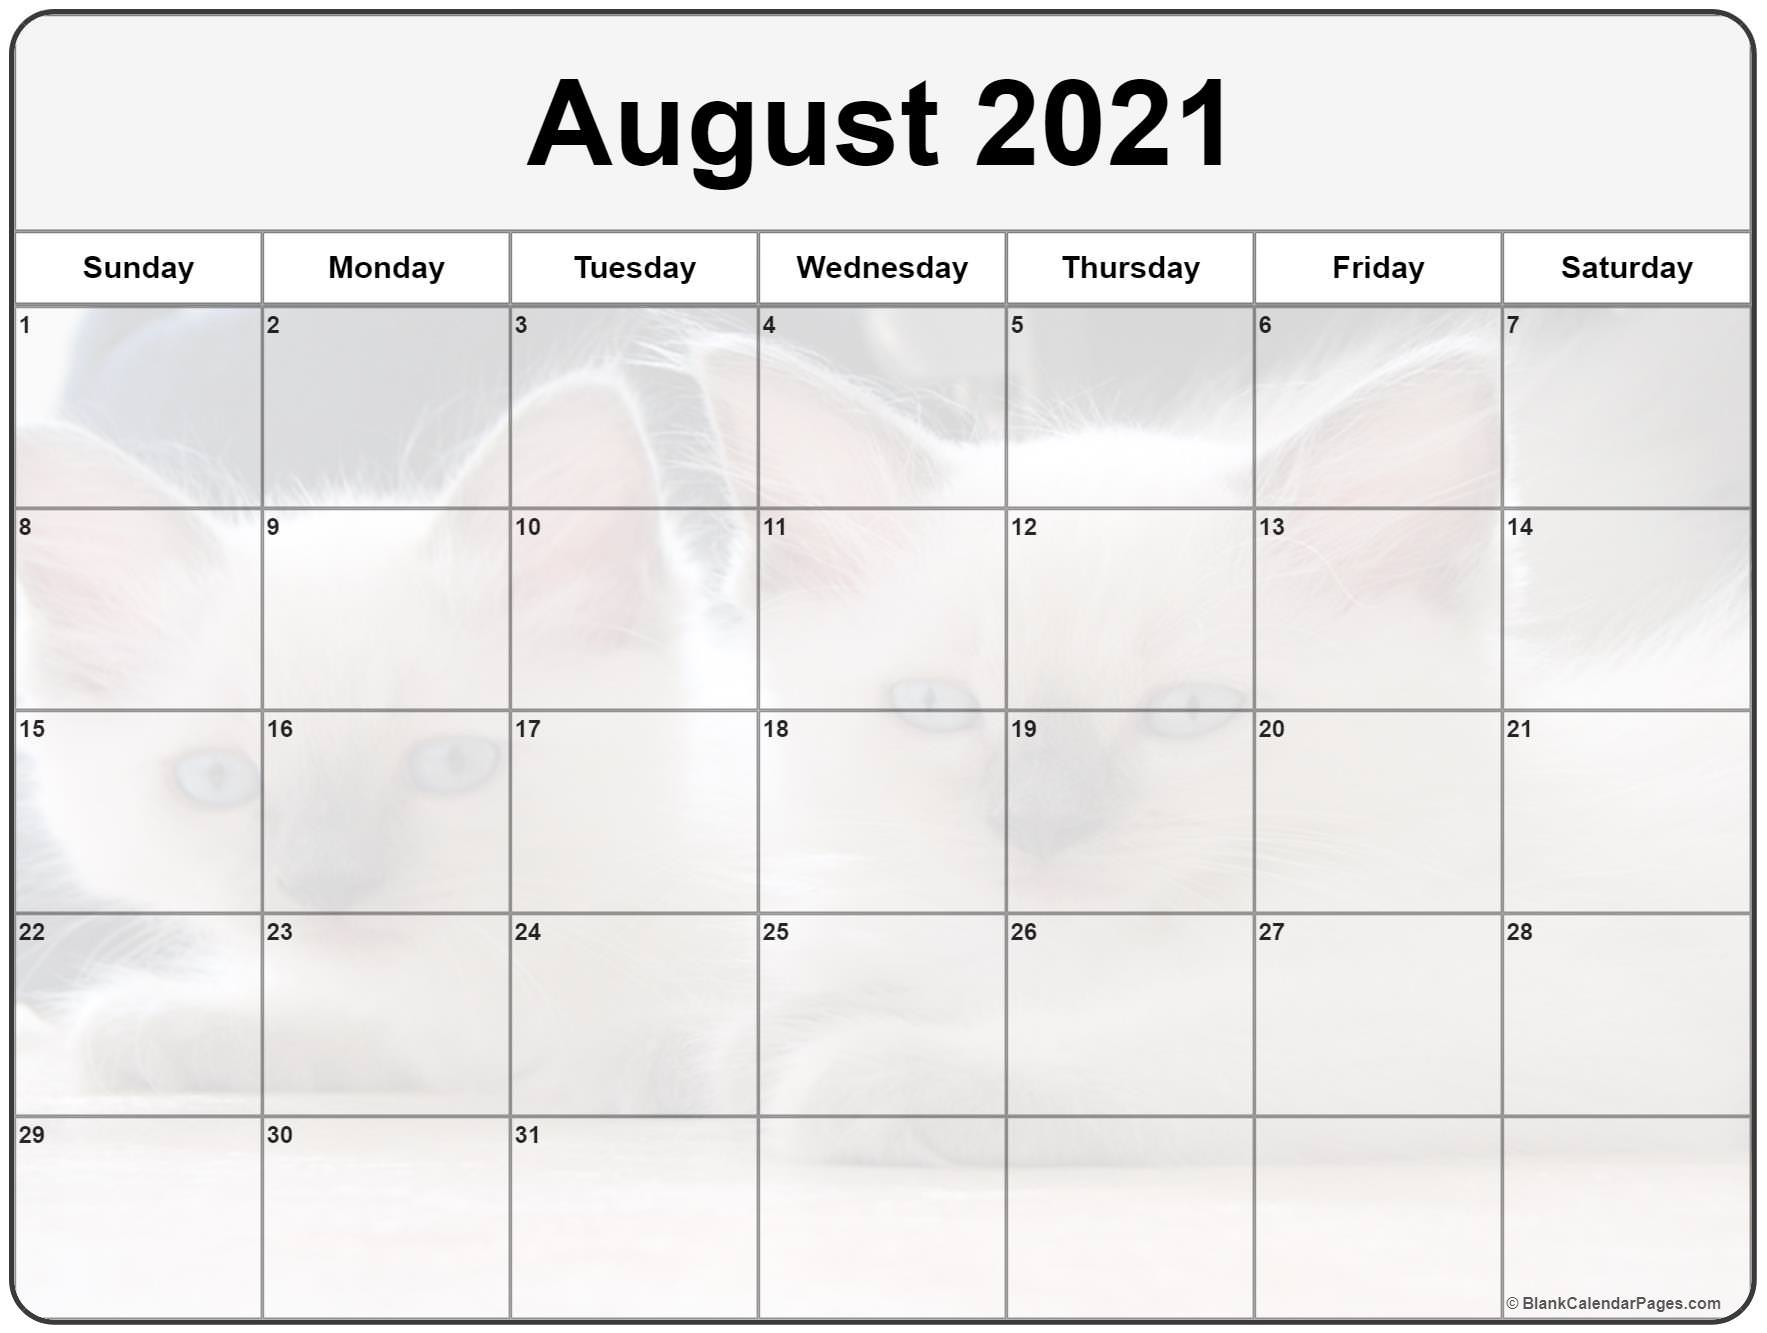 Collection Of August 2021 Photo Calendars With Image Filters.-Printable Blank Monthly Calendar August 2021